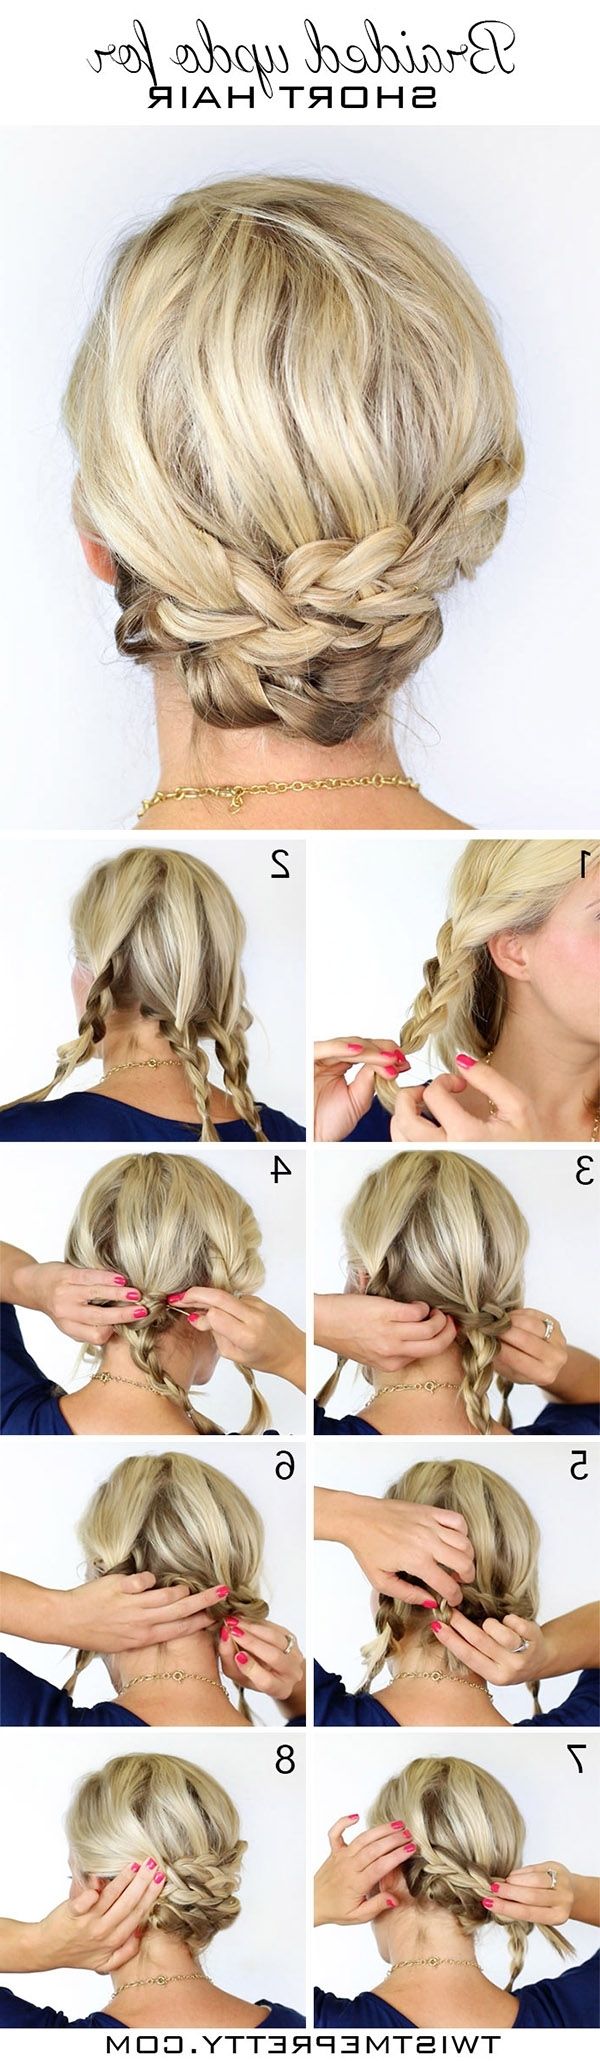 20 Diy Wedding Hairstyles With Tutorials To Try On Your Own With 2017 Diy Wedding Hairstyles For Long Hair (View 14 of 15)